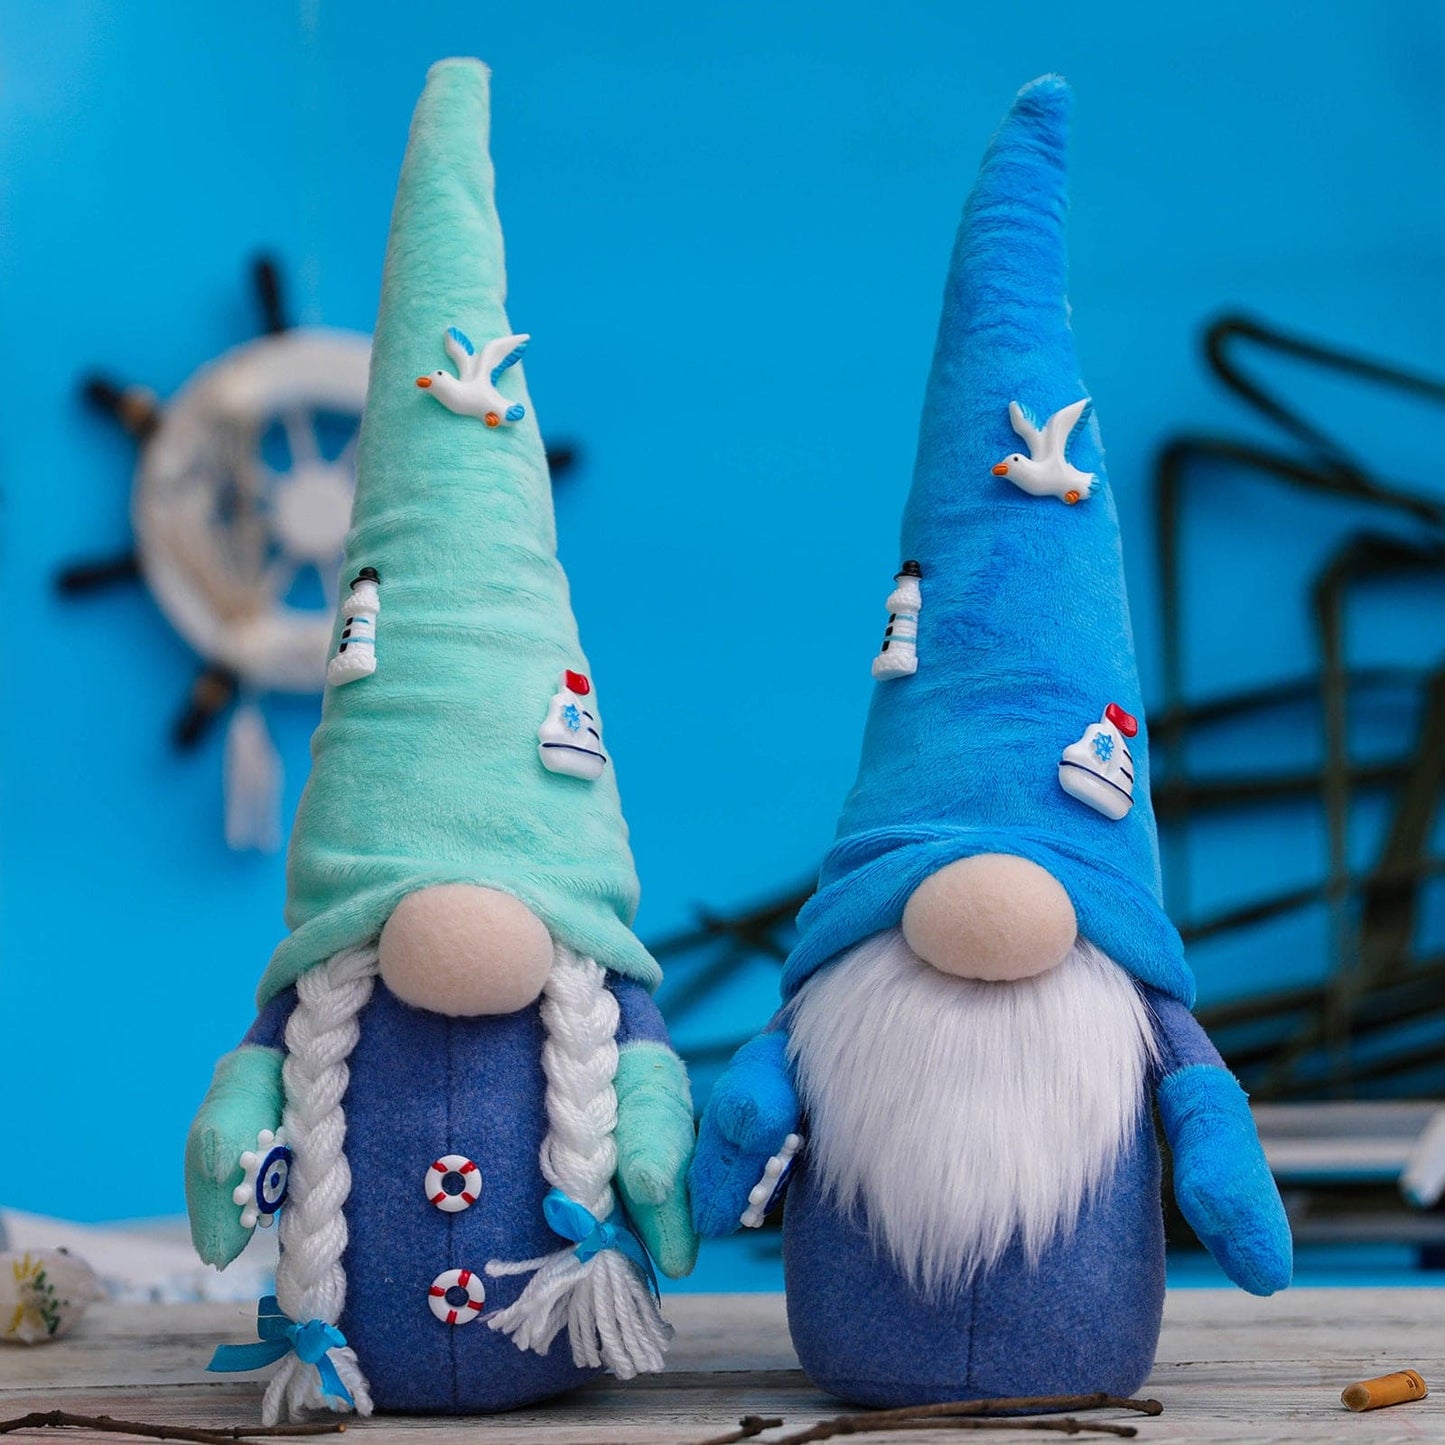 Ocean Themed Gnome Doll With Long Hat And White Beard